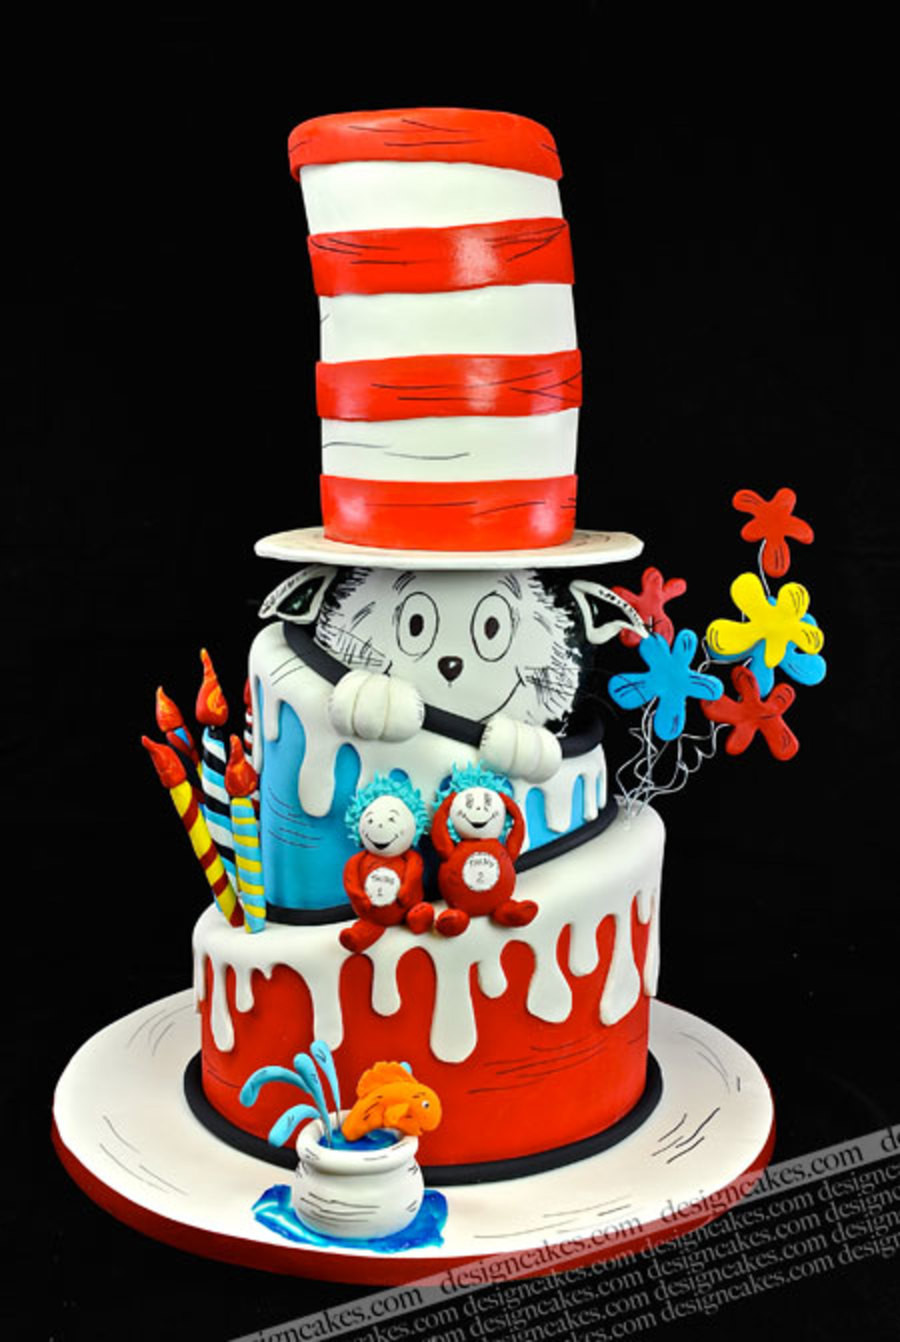 Dr Seuss Birthday Cake
 Cat In The Hat Cake Druss Cake CakeCentral